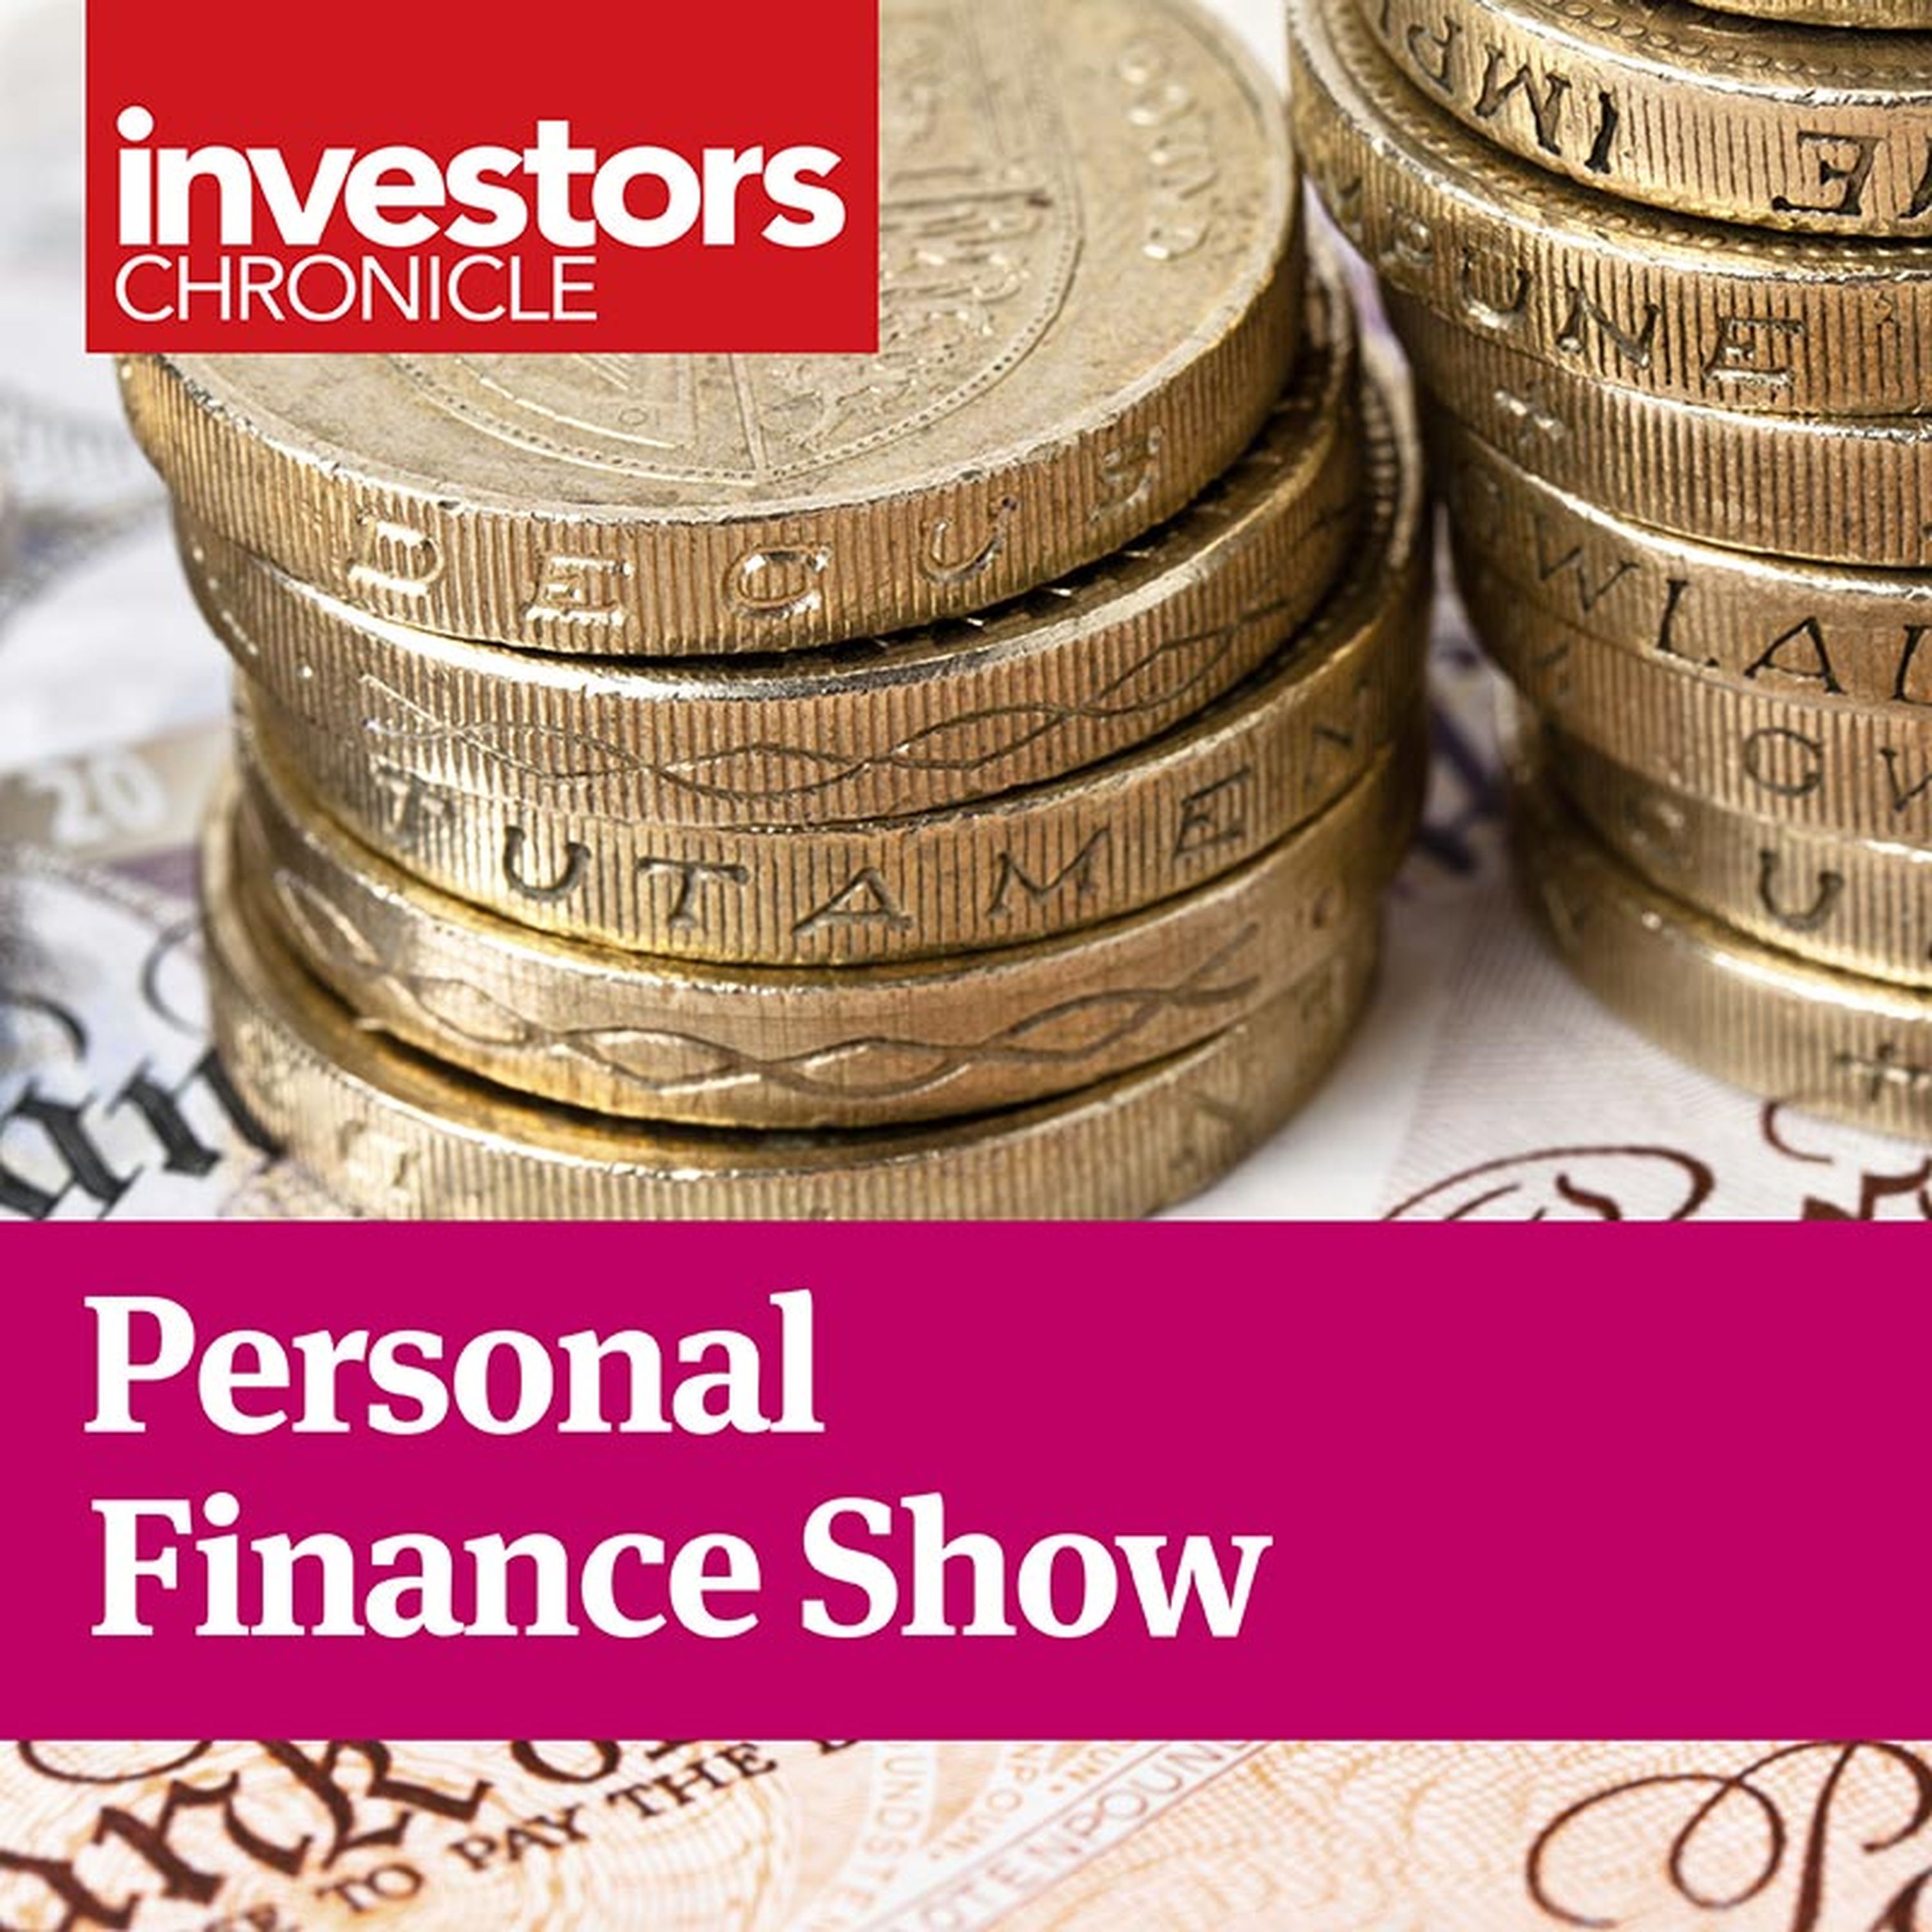 Personal Finance Show: Overseas equity income